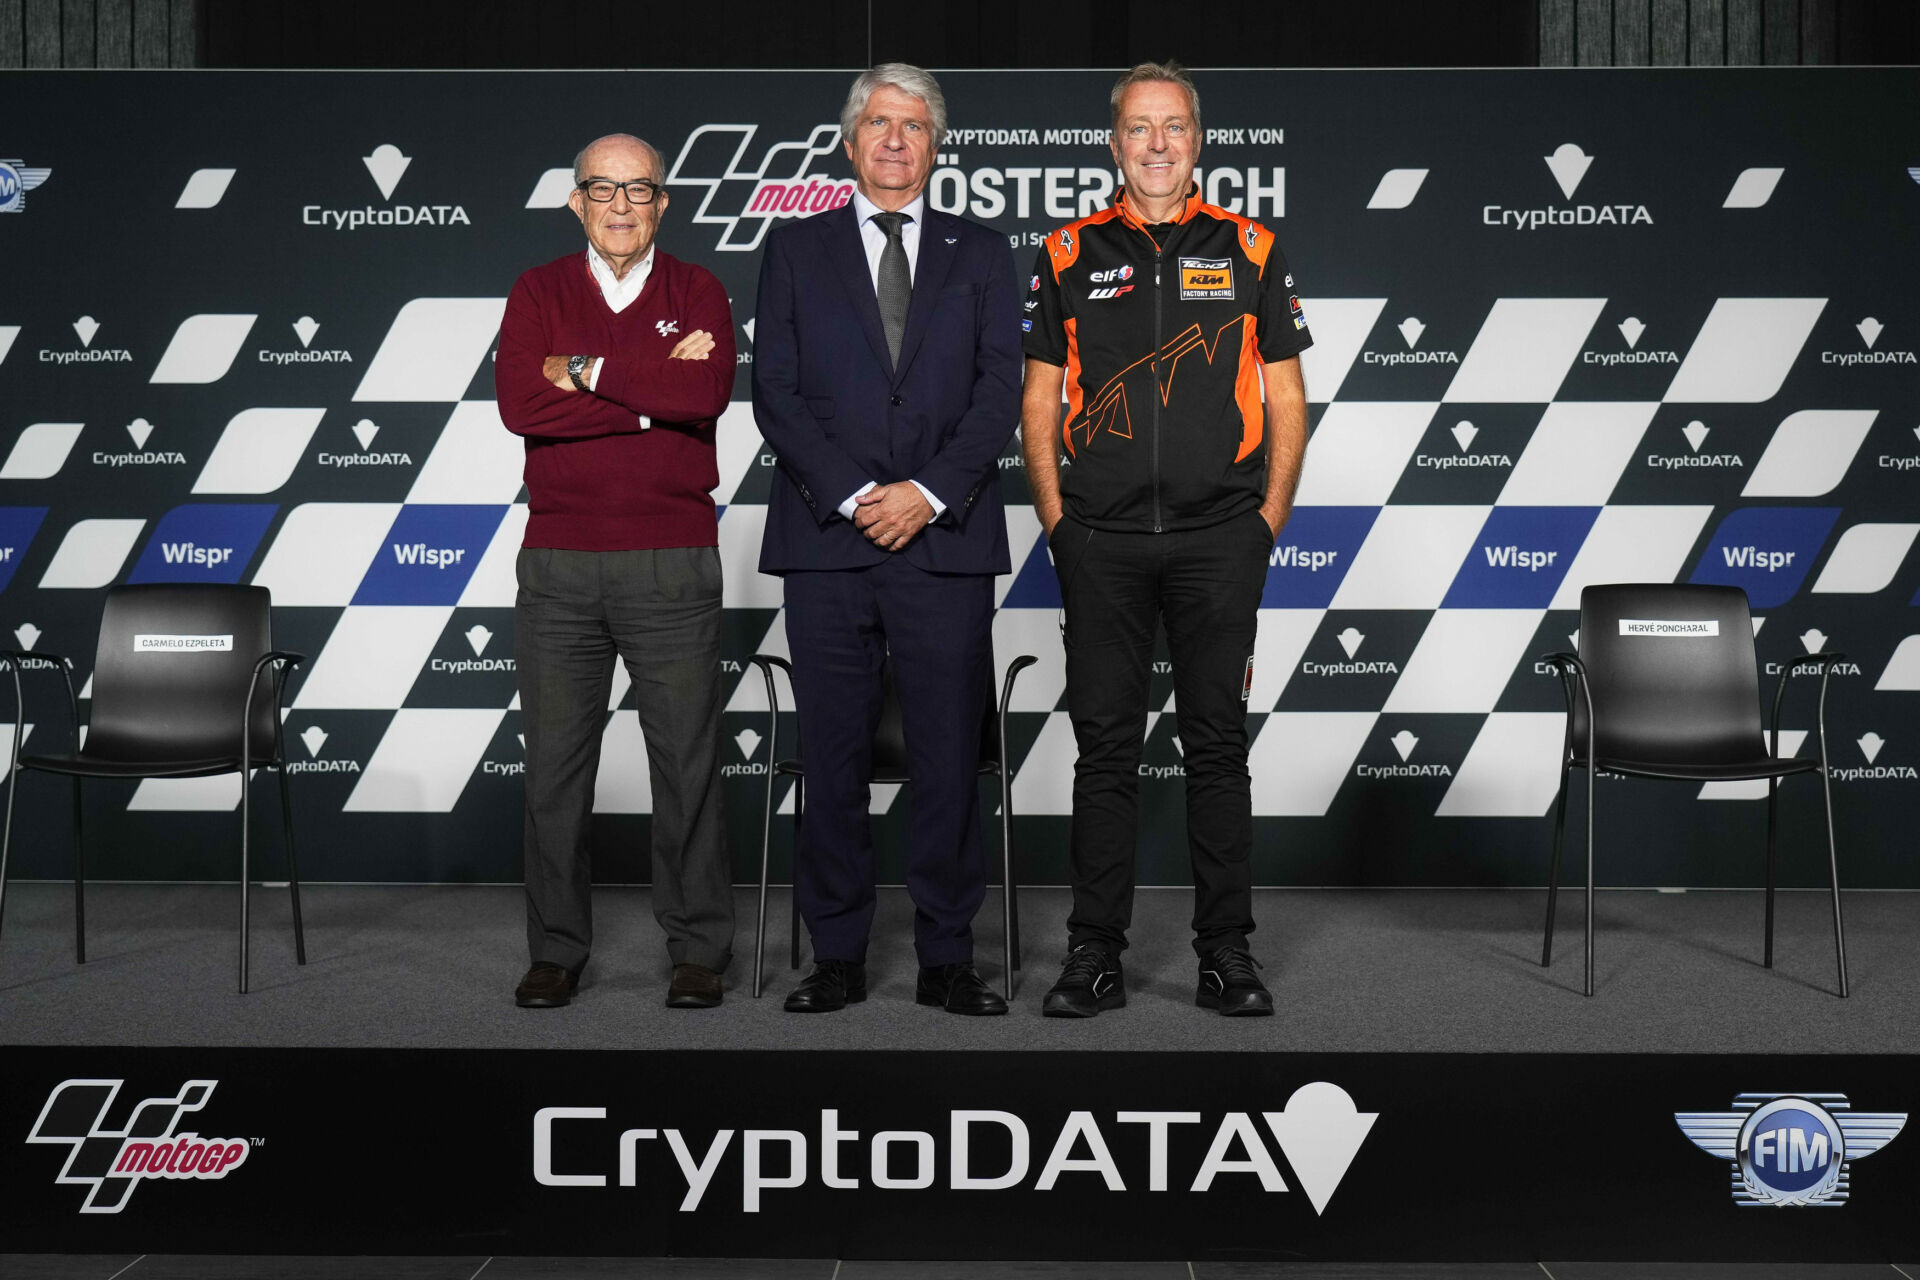 (From left) Dorna CEO Carmelo Ezpeleta, FIM President Jorge Viegas, and IRTA President Herve Poncharal at the press conference announcing the new Sprint race format in MotoGP. Photo courtesy Dorna.